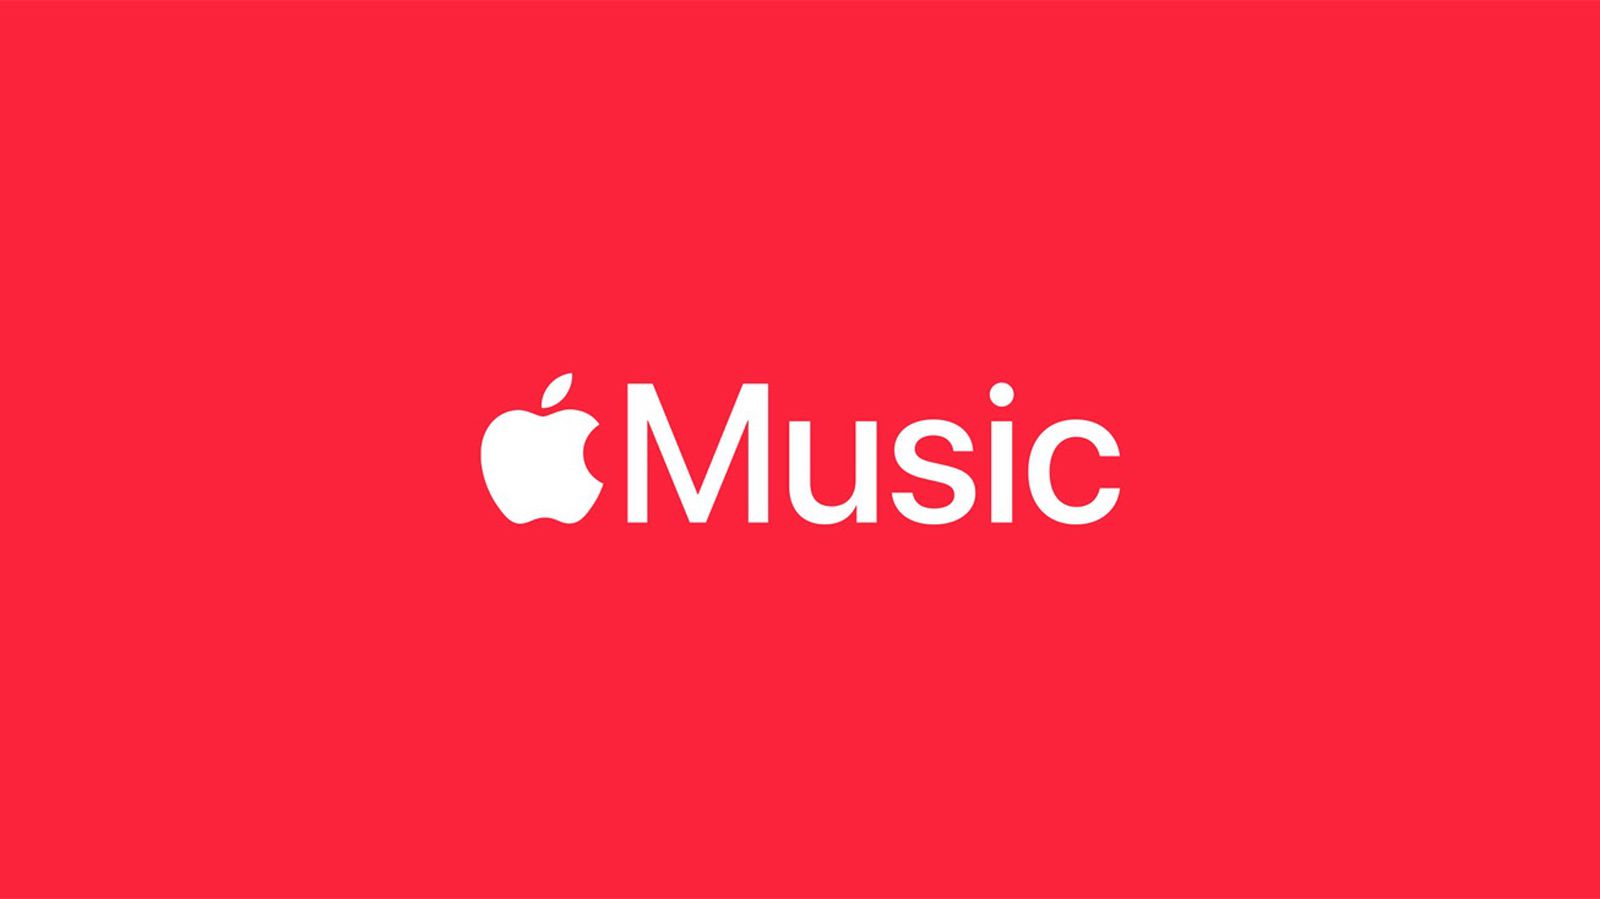 Apple Increases Apple Music Subscription Price for Students in Several Countries